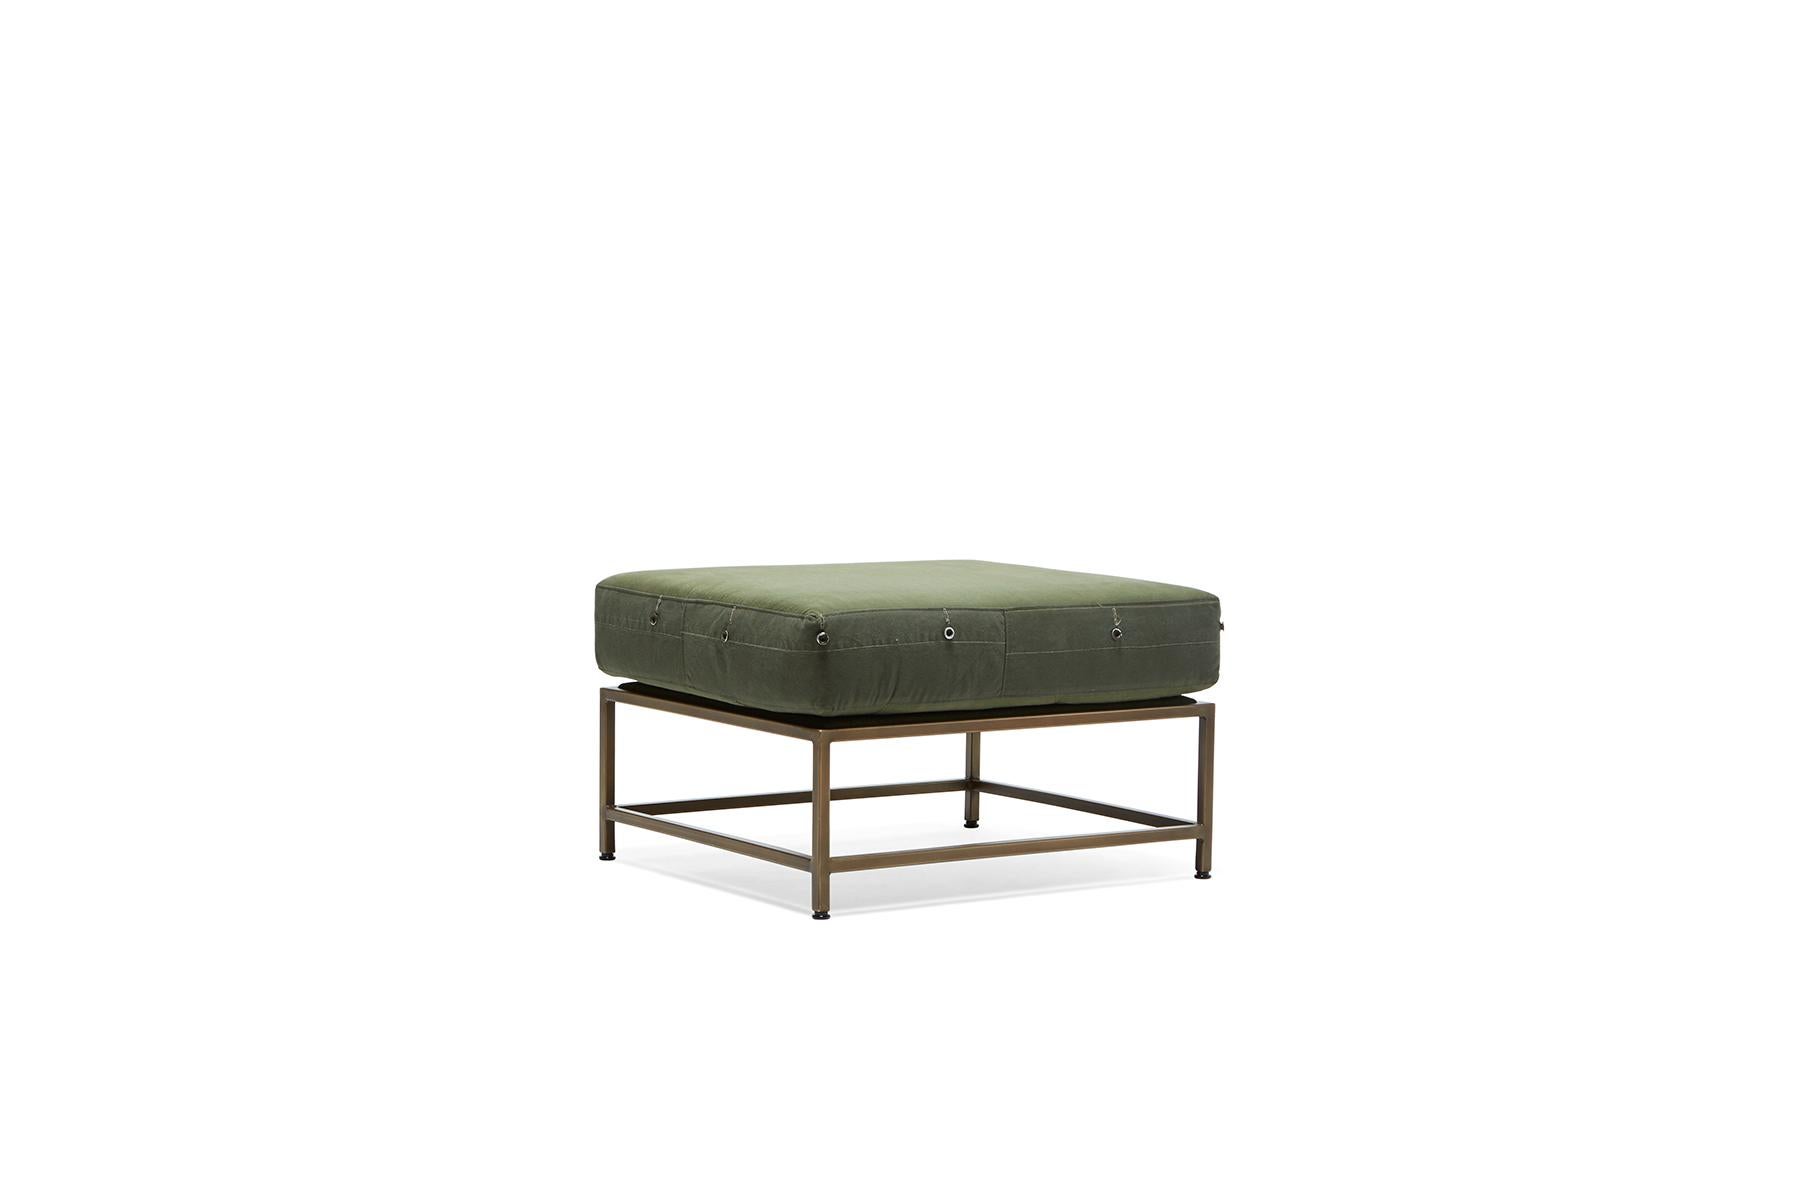 Designed to pair with any of the Inheritance seating options, the ottoman is a great addition to add a lounge element to your seating arrangement.

Since first designing Inheritance collection, Stephen Kenn has been inspired by the inherent